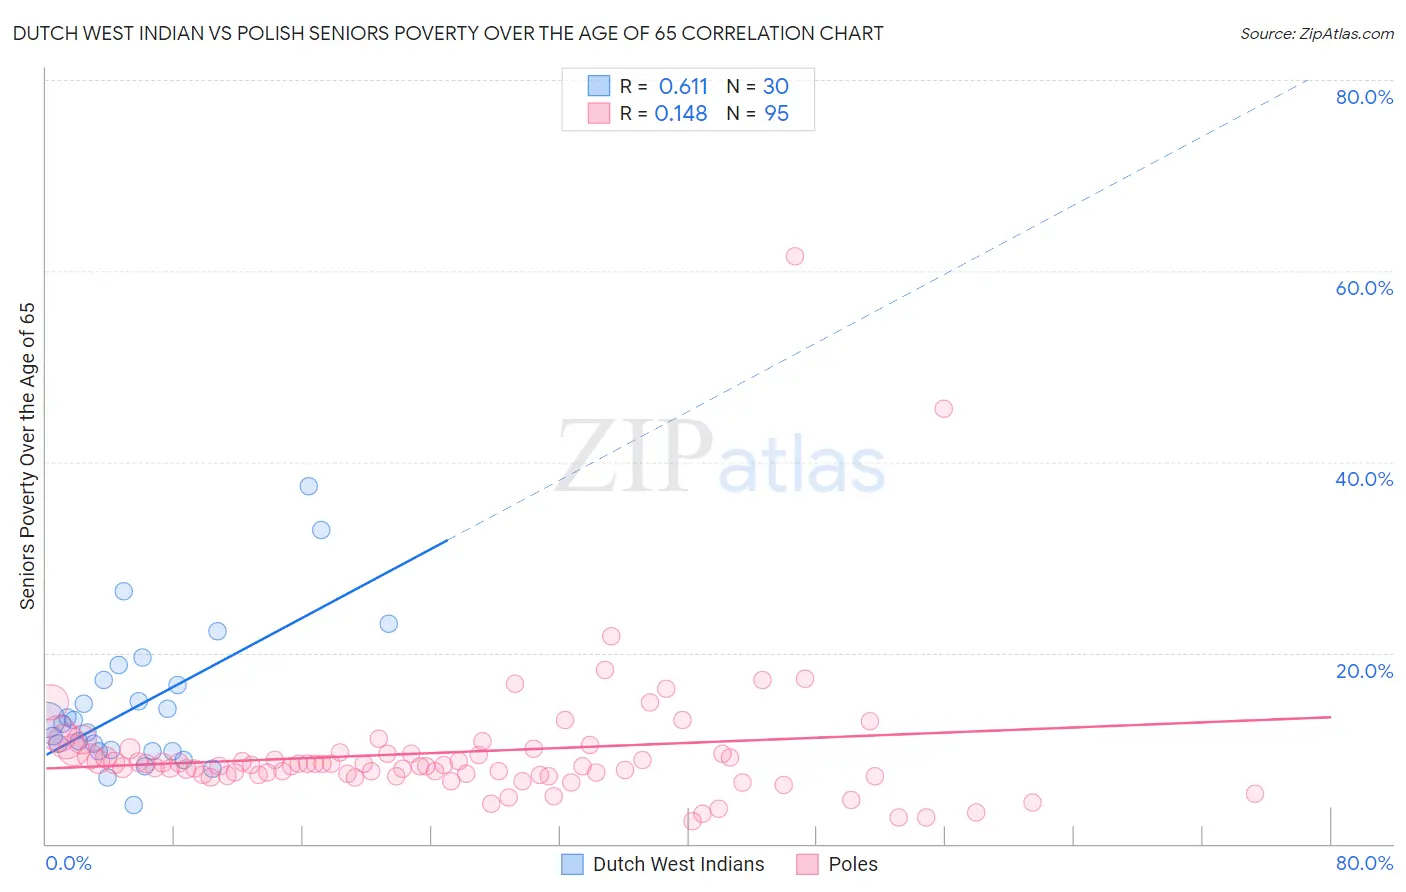 Dutch West Indian vs Polish Seniors Poverty Over the Age of 65